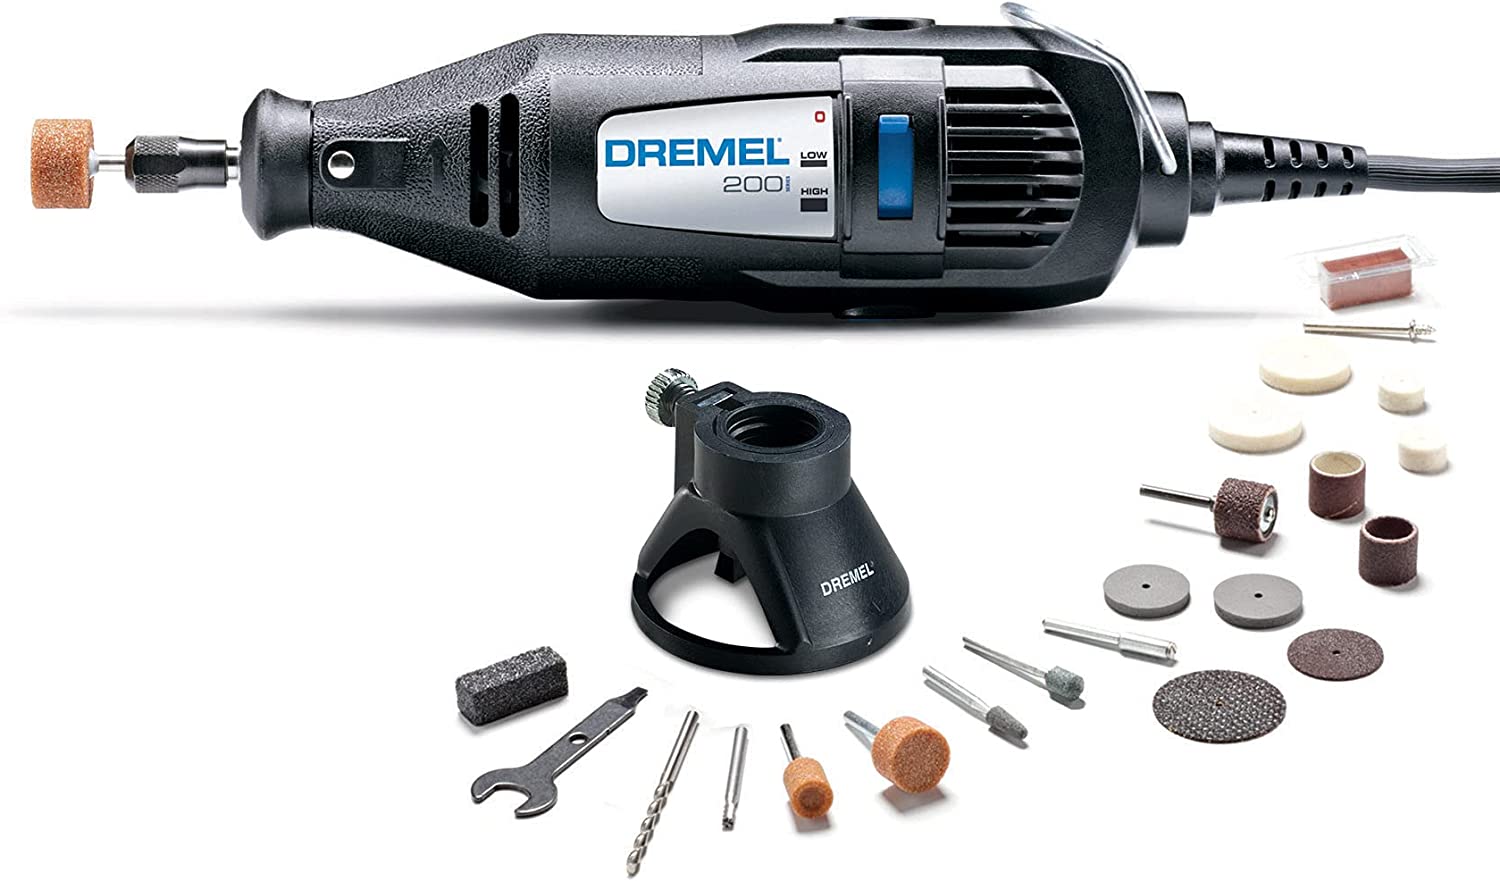 Dremel 200-1/21 Two-Speed Rotary Tool Kit with 21 Accessories $34.78 + free s/h